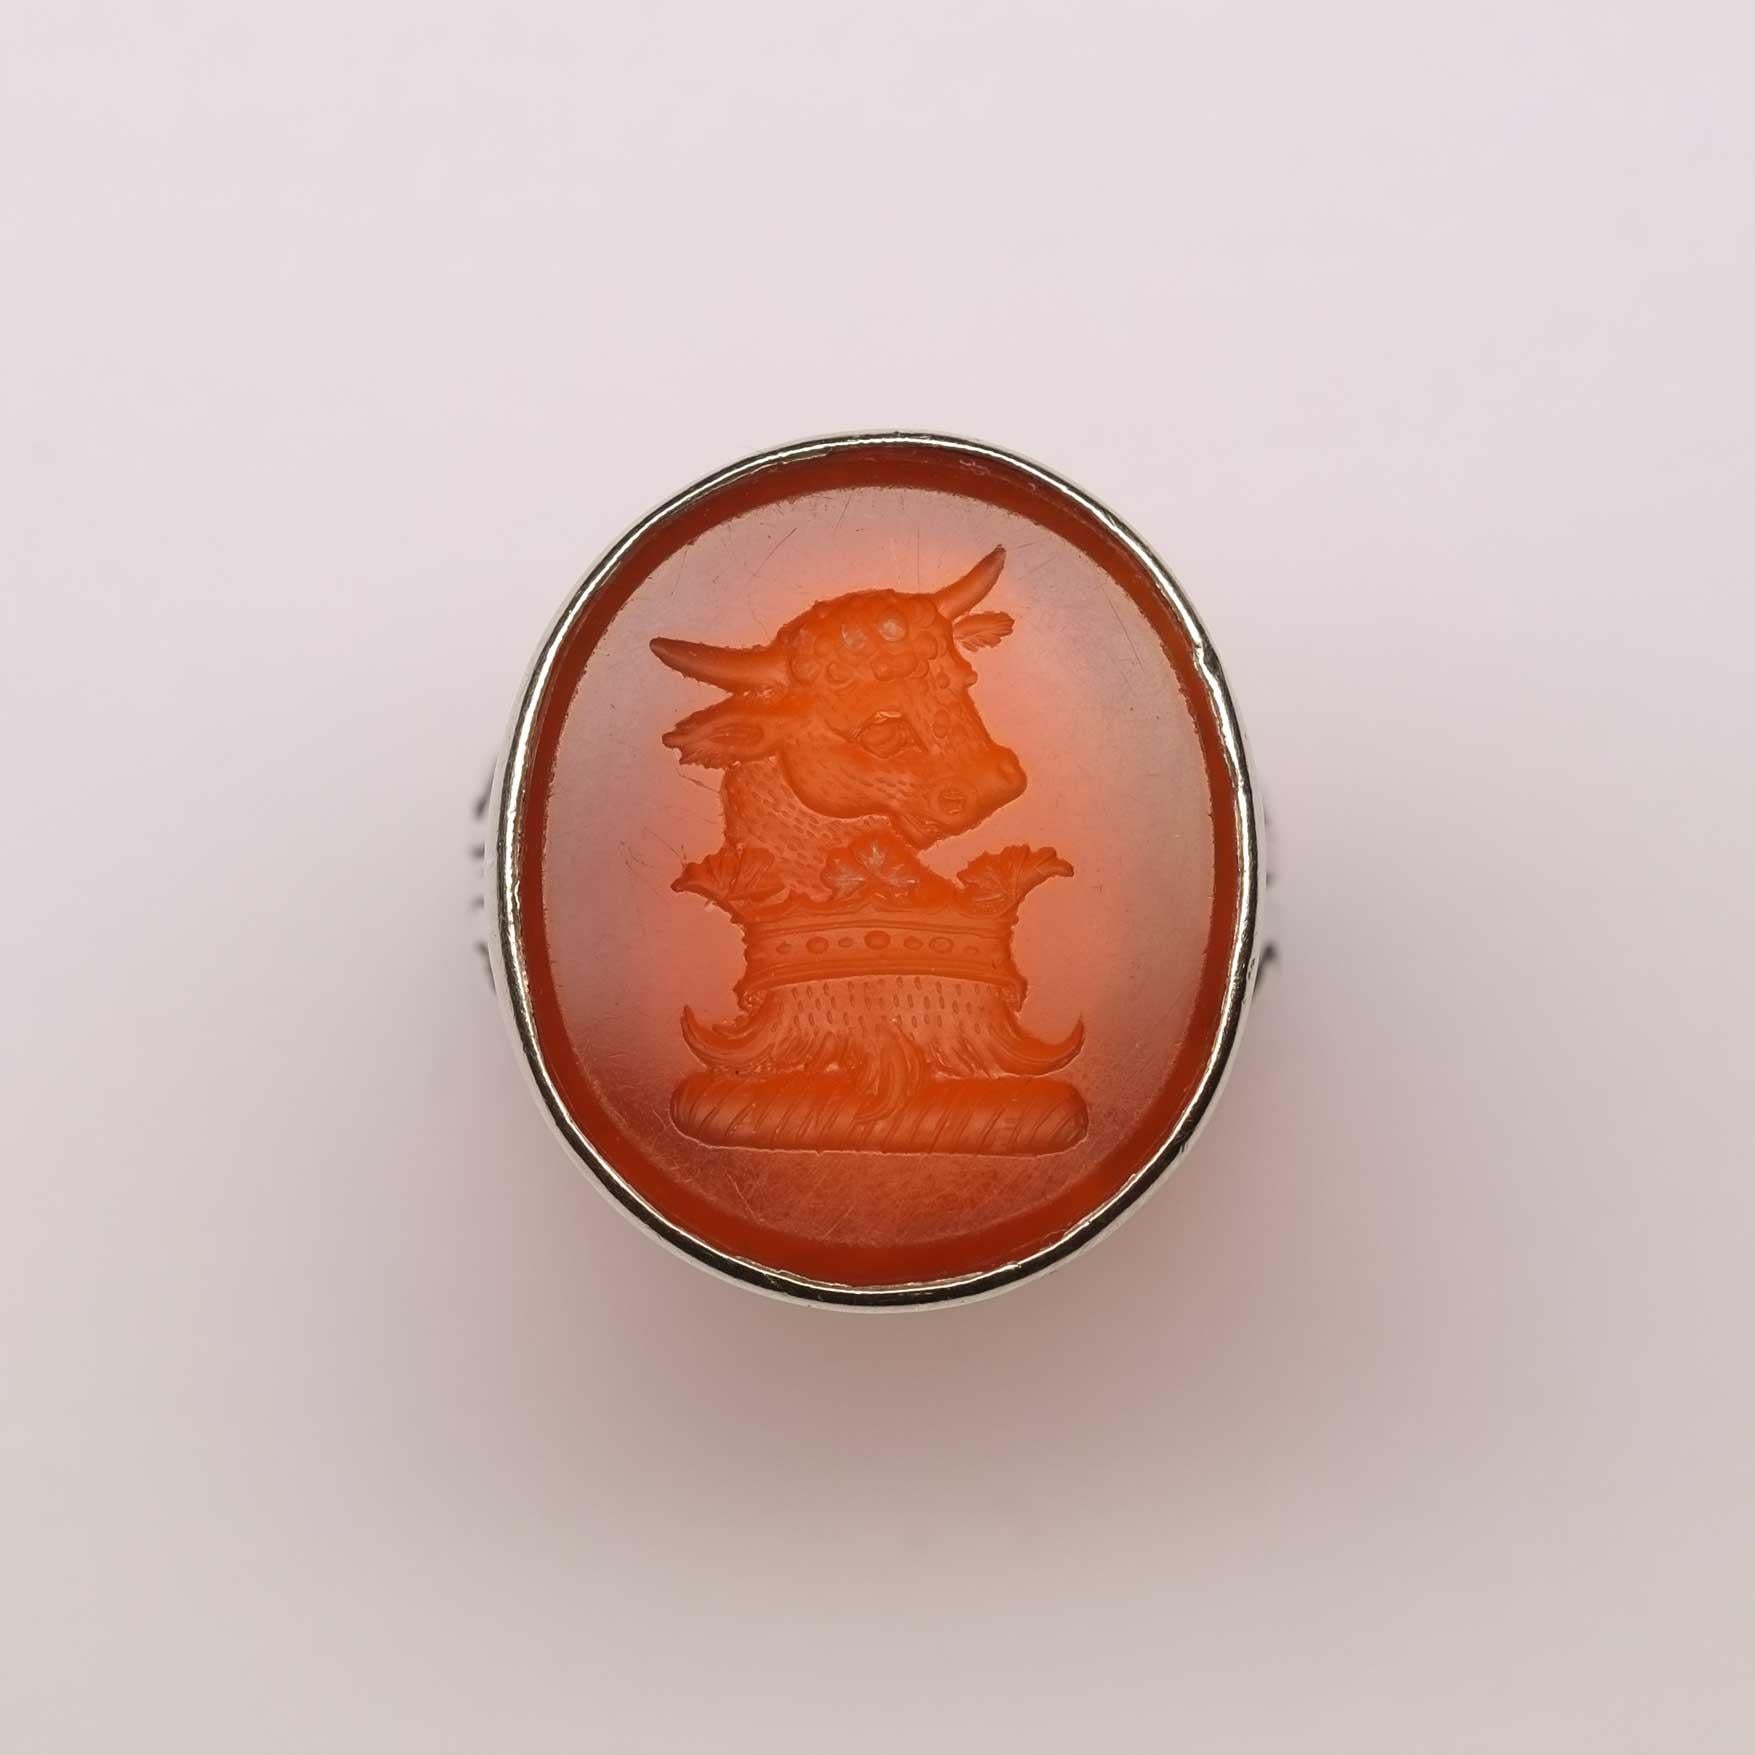 Carnelian intaglio ring set in silver depicting a bull.

Highlights
- Carnelian
- Silver ring setting

Measurements
- Length 1.9cm x Width 2.2cm
- Italian ring size 12 (size can be altered if required)